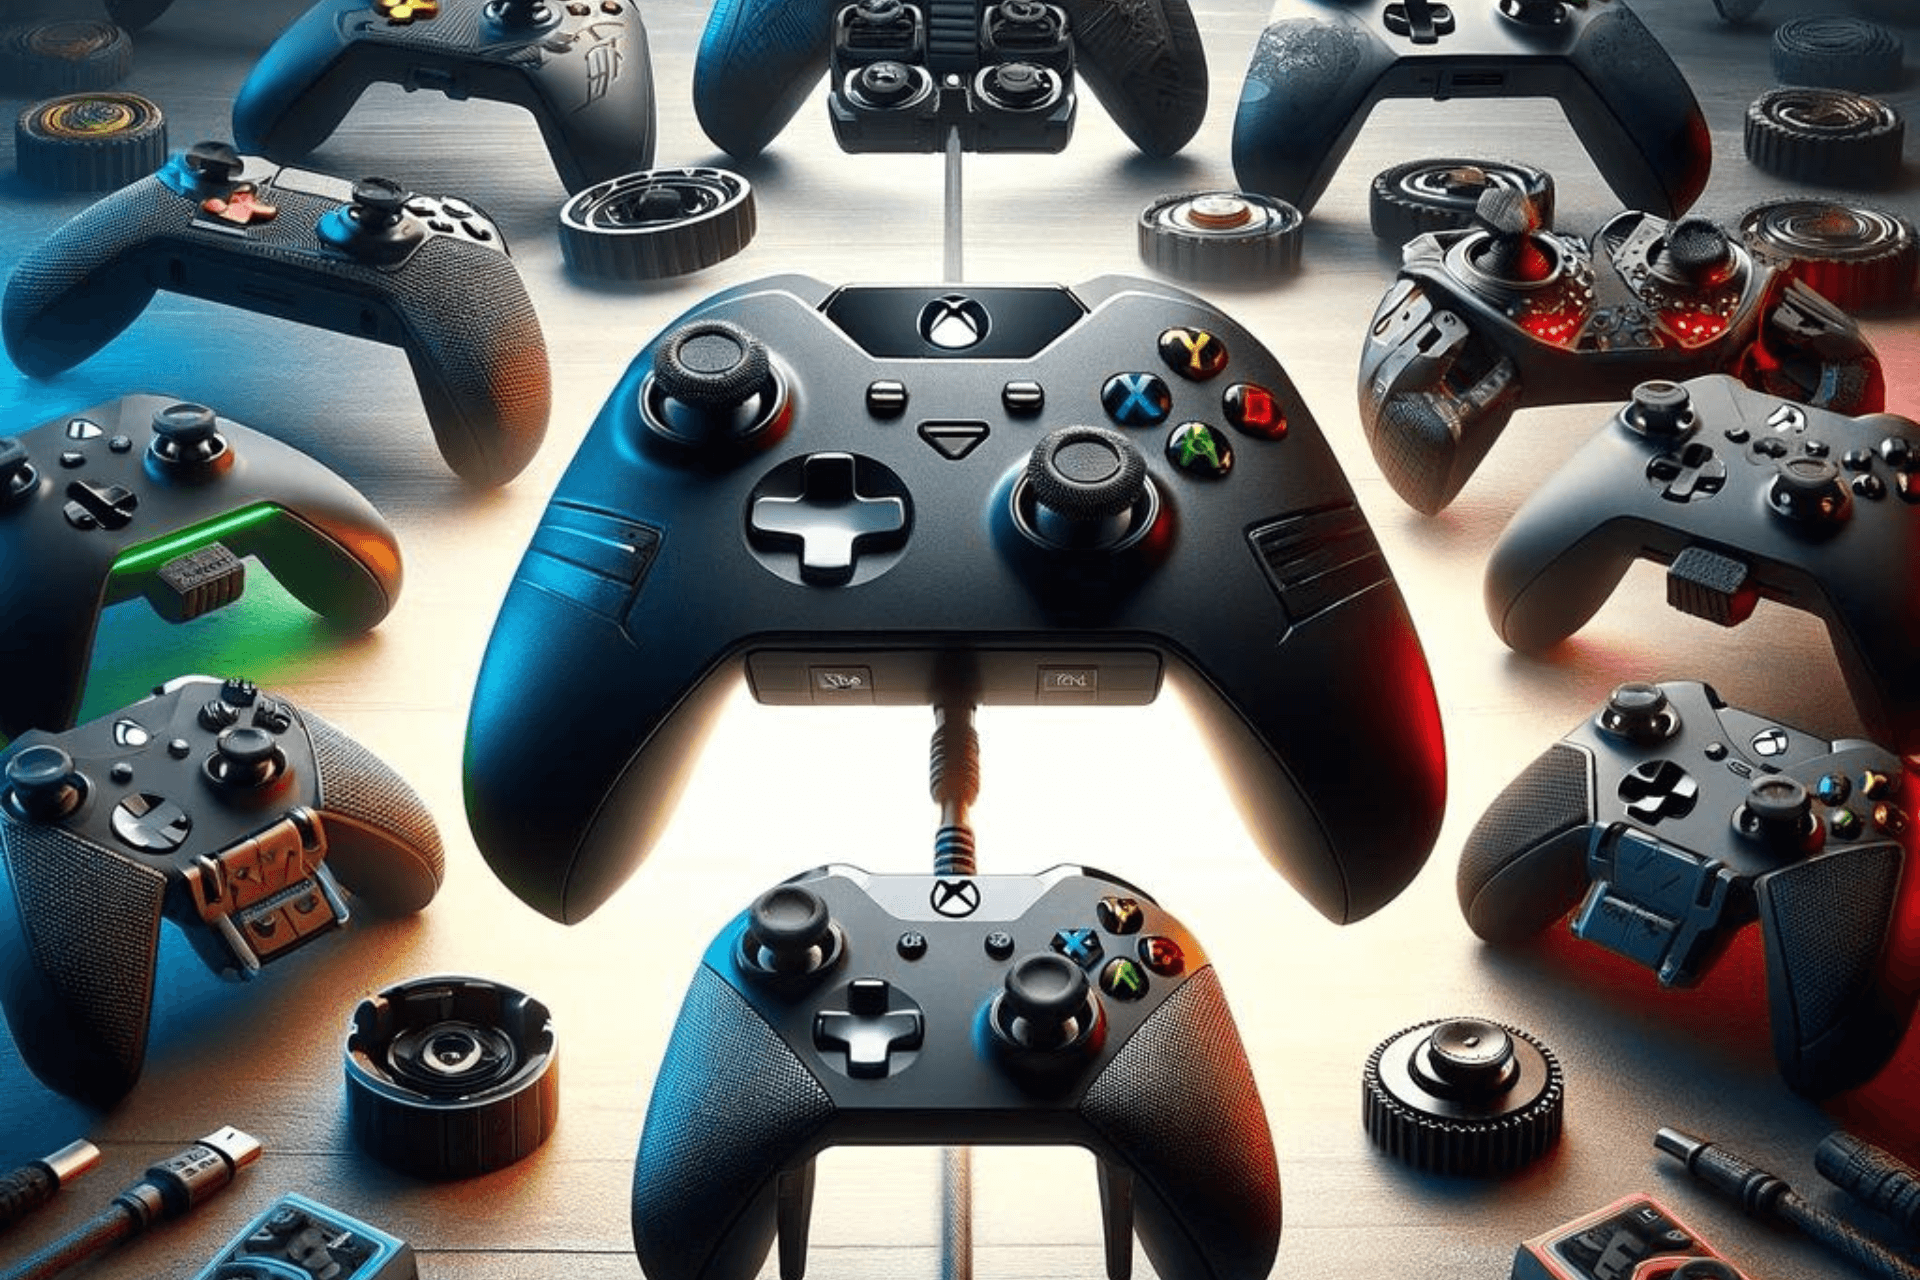 What are the XL alternatives to the Xbox controller?